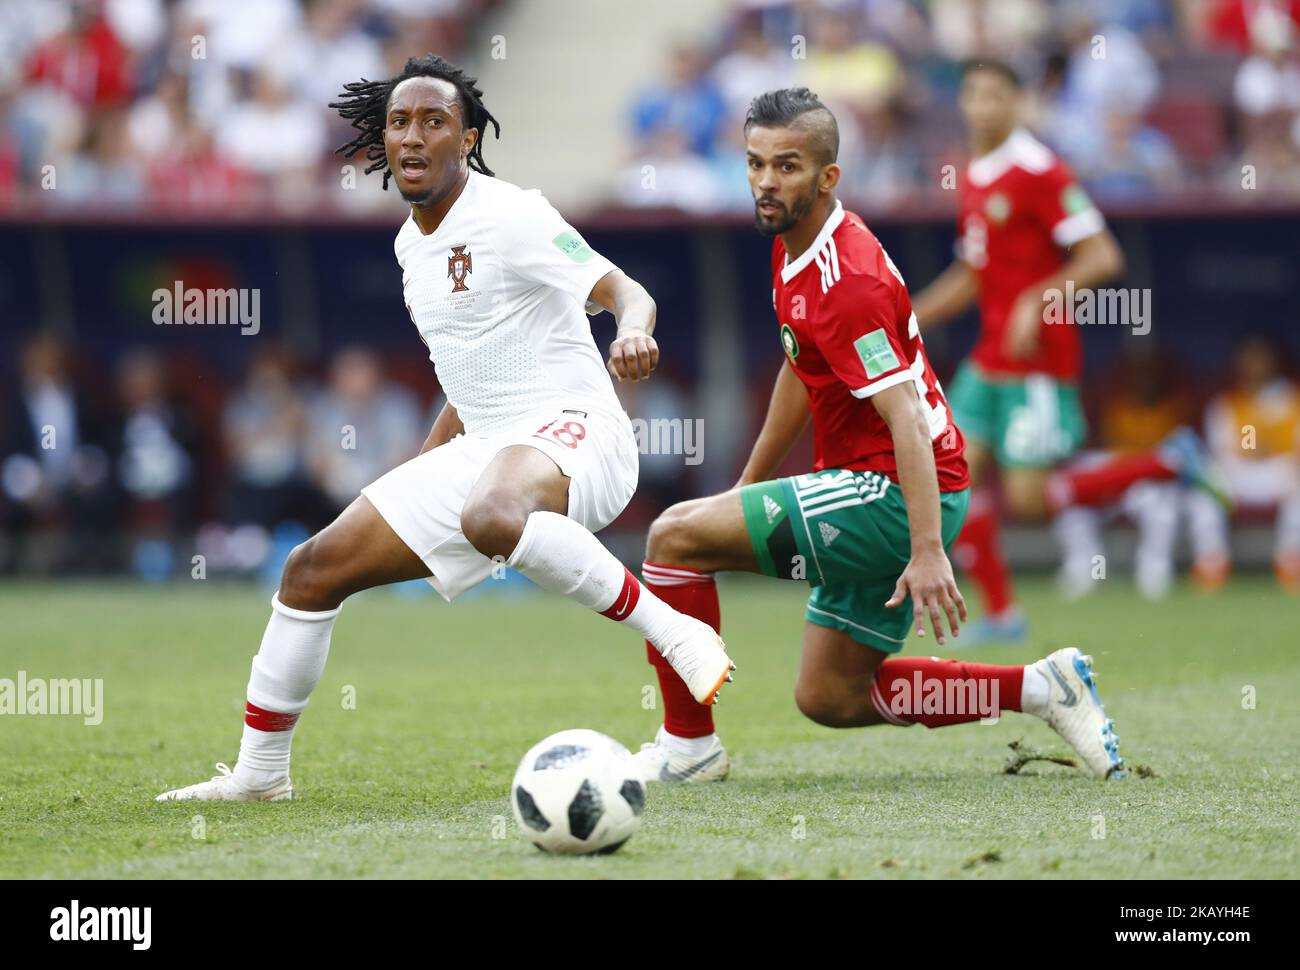 Group B Portugal v Morocco - FIFA World Cup Russia 2018 Gelson Martins (Portugal) at Luzhniki Stadium in Moscow, Russia on June 20, 2018. (Photo by Matteo Ciambelli/NurPhoto)  Stock Photo